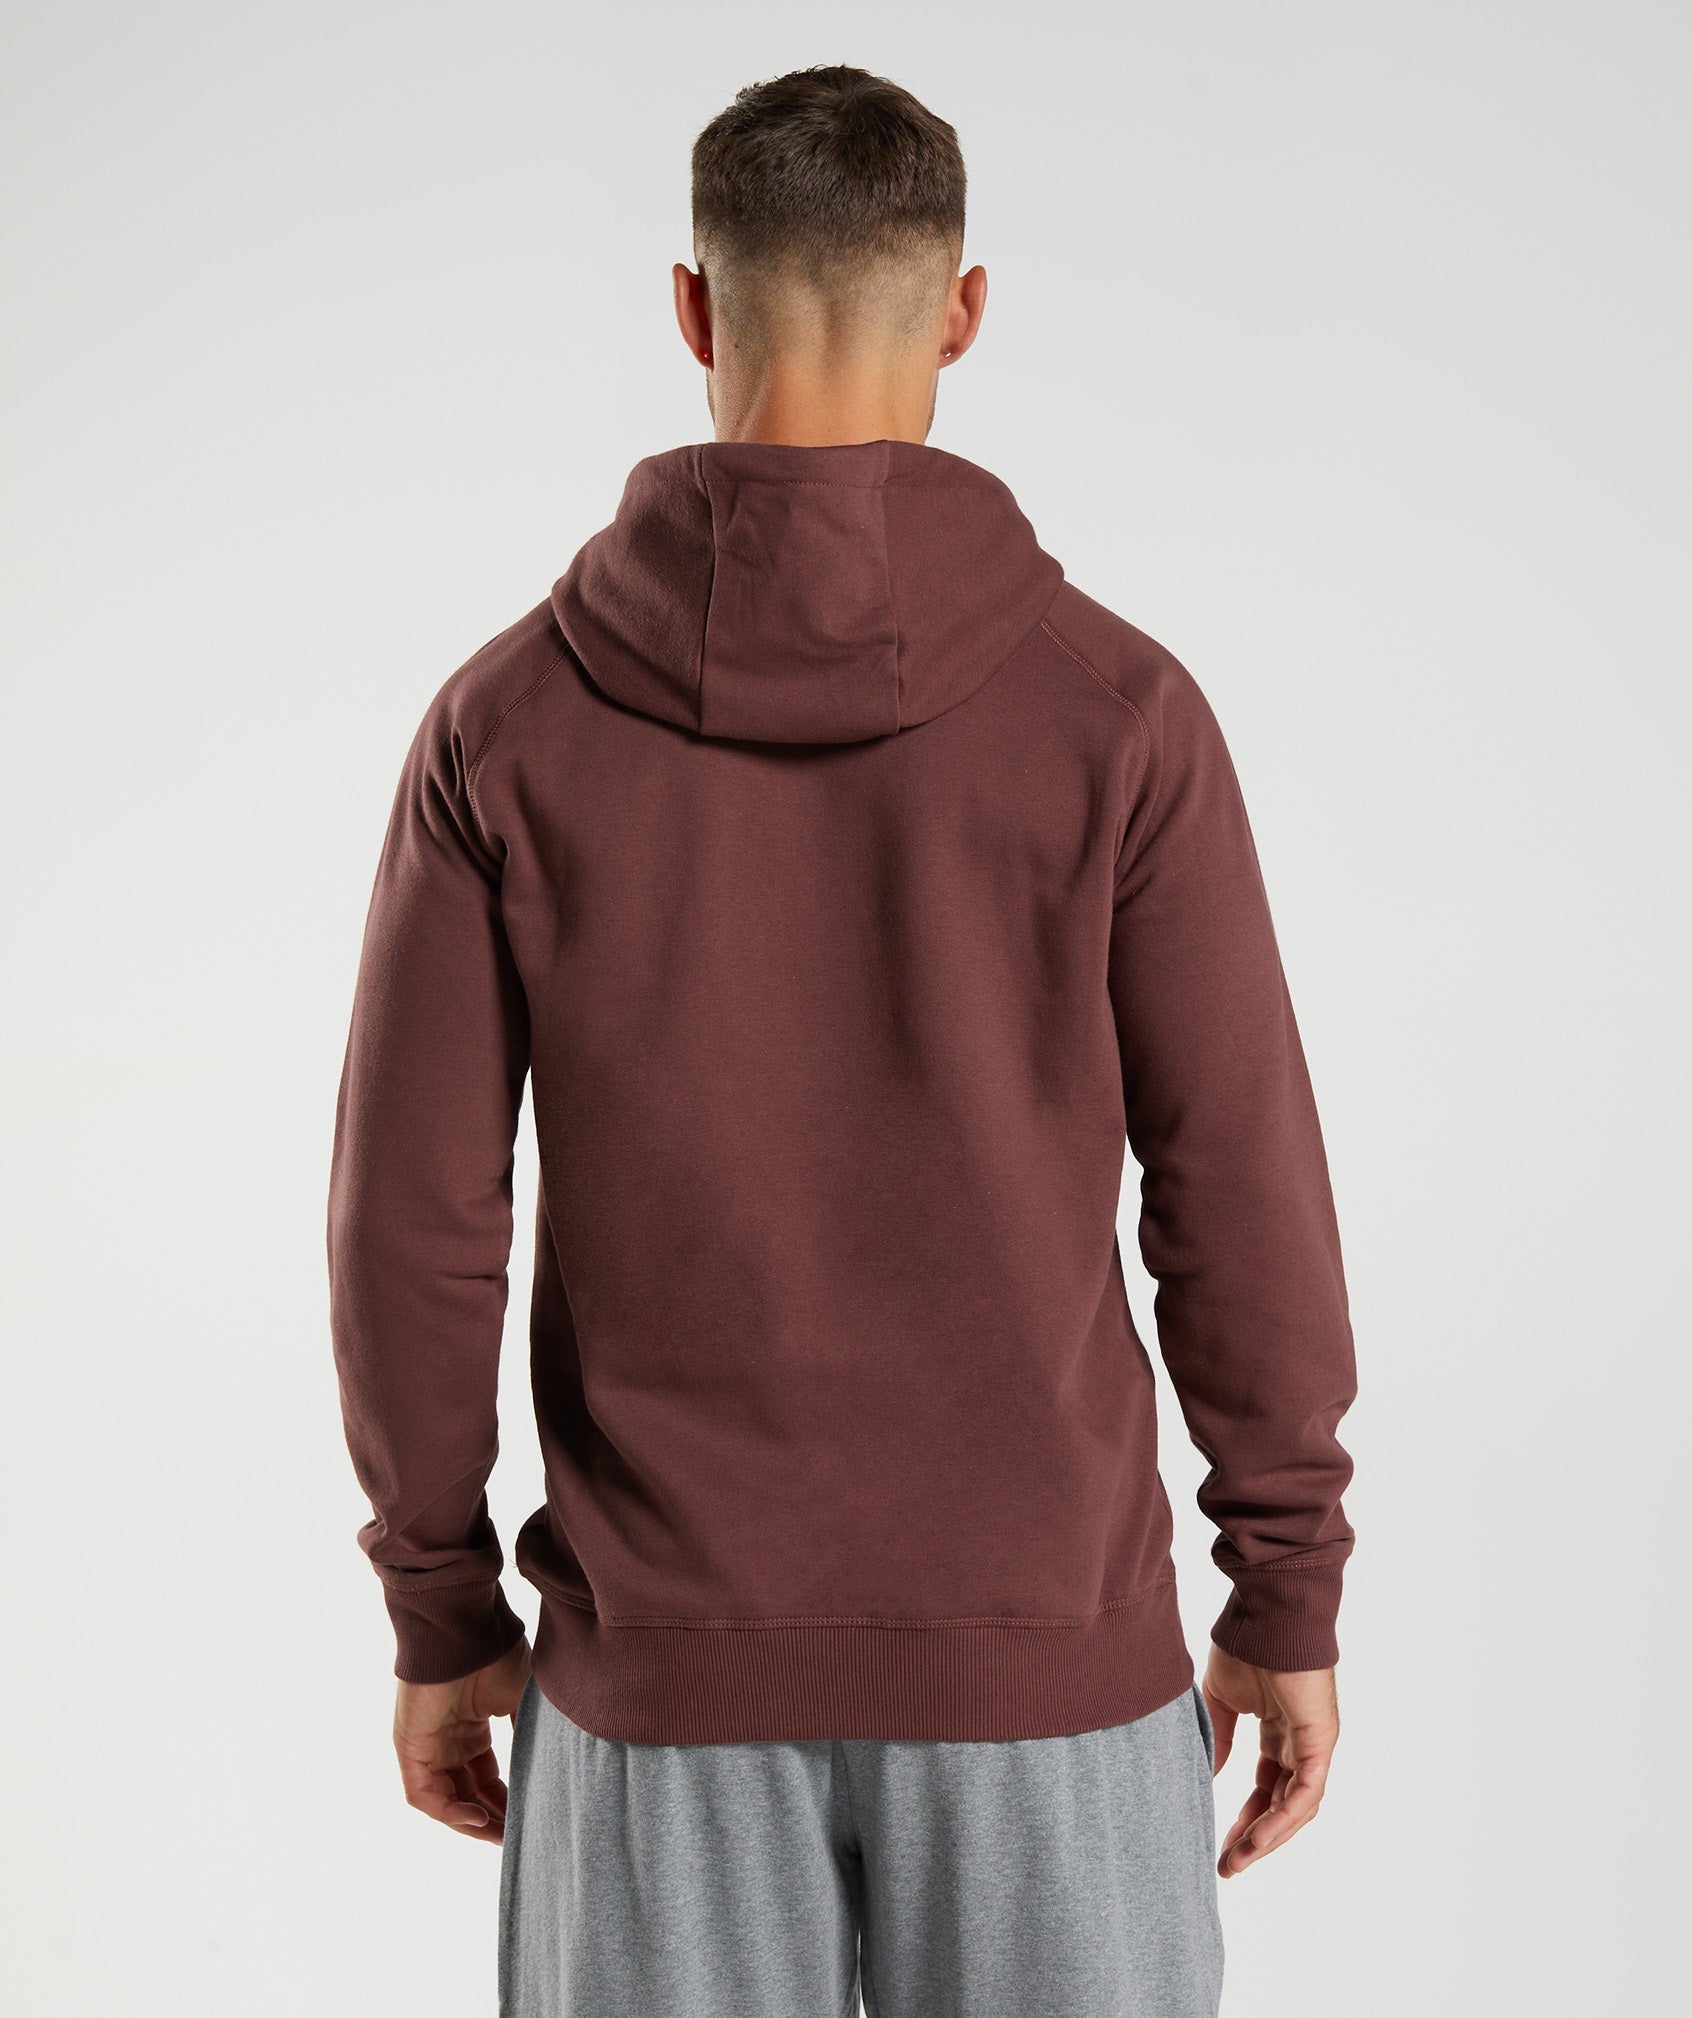 Crest Hoodie in Cherry Brown - view 2